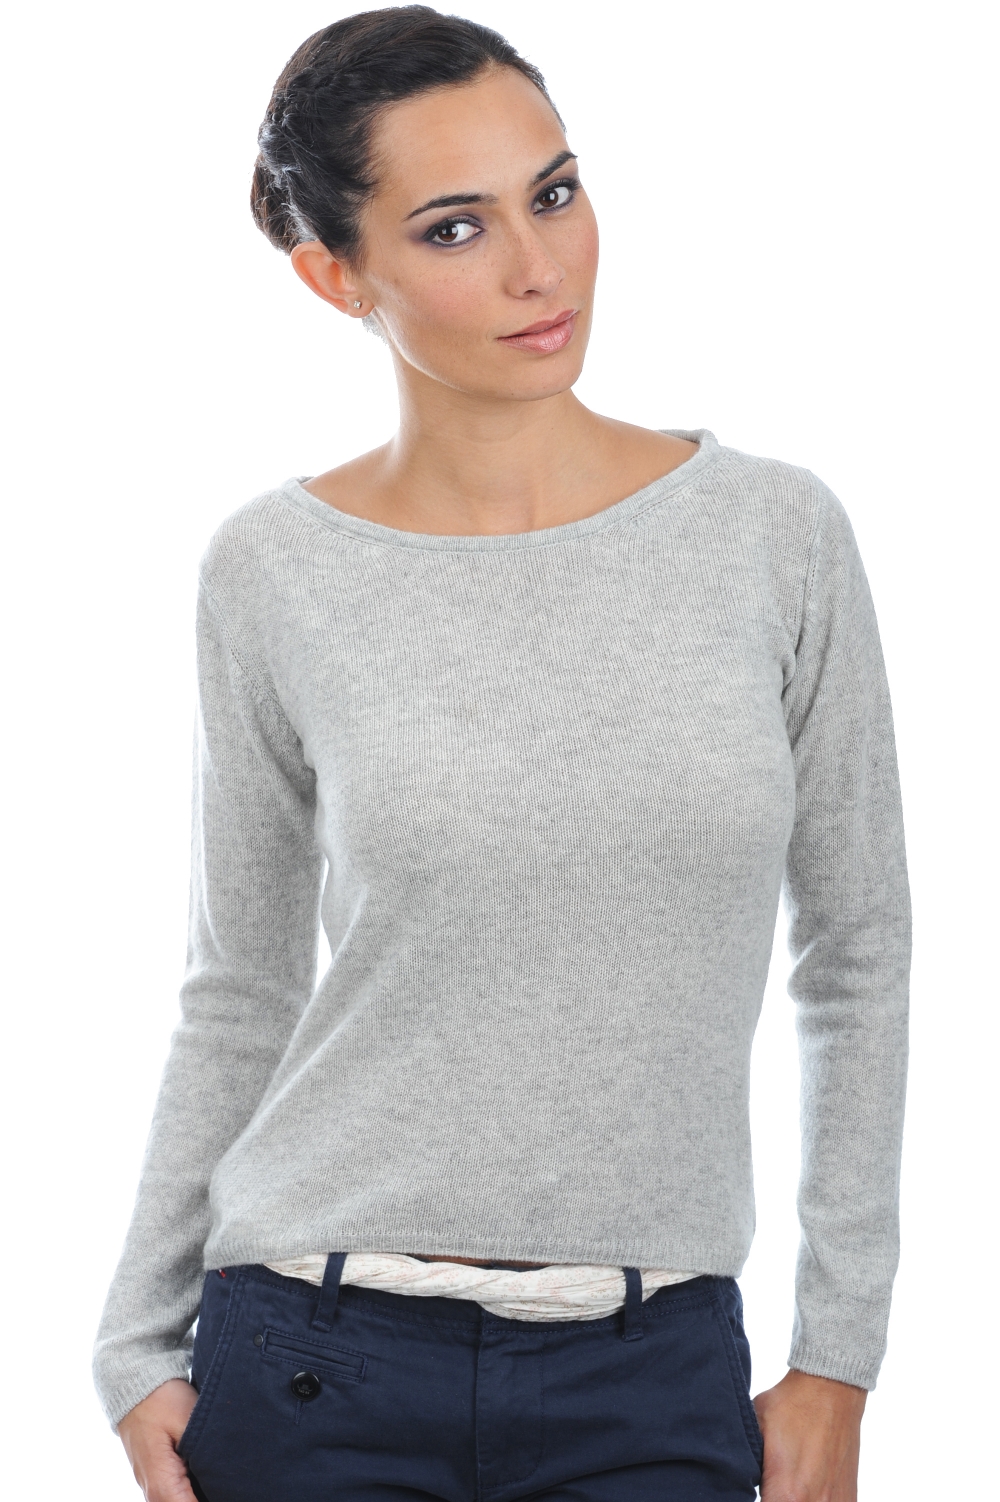 Cashmere ladies basic sweaters at low prices caleen flanelle chine m